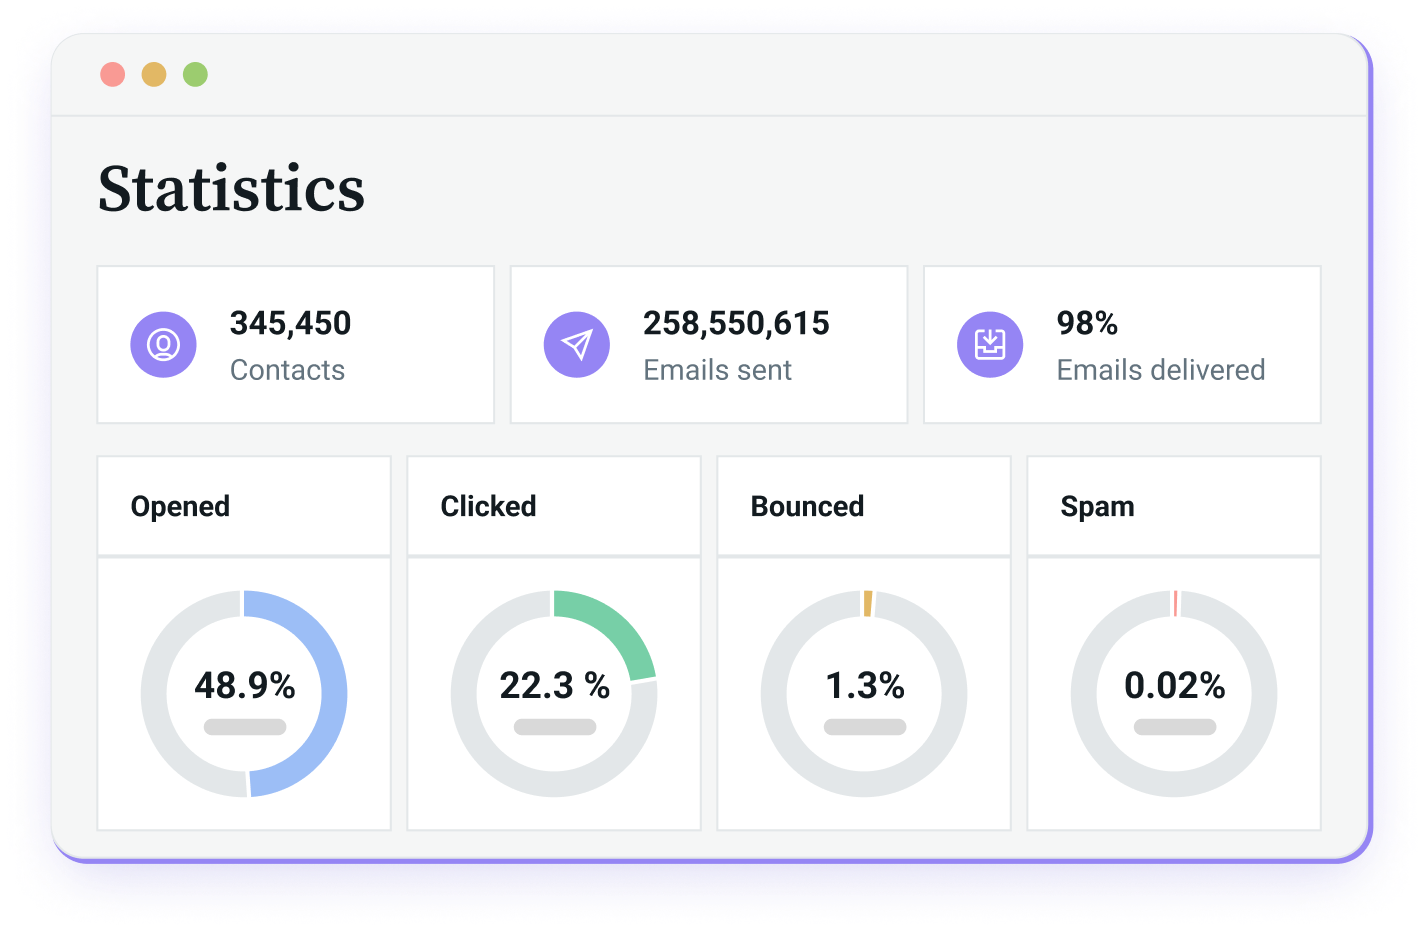 Mailjet's advanced email statistics for an email campaign.